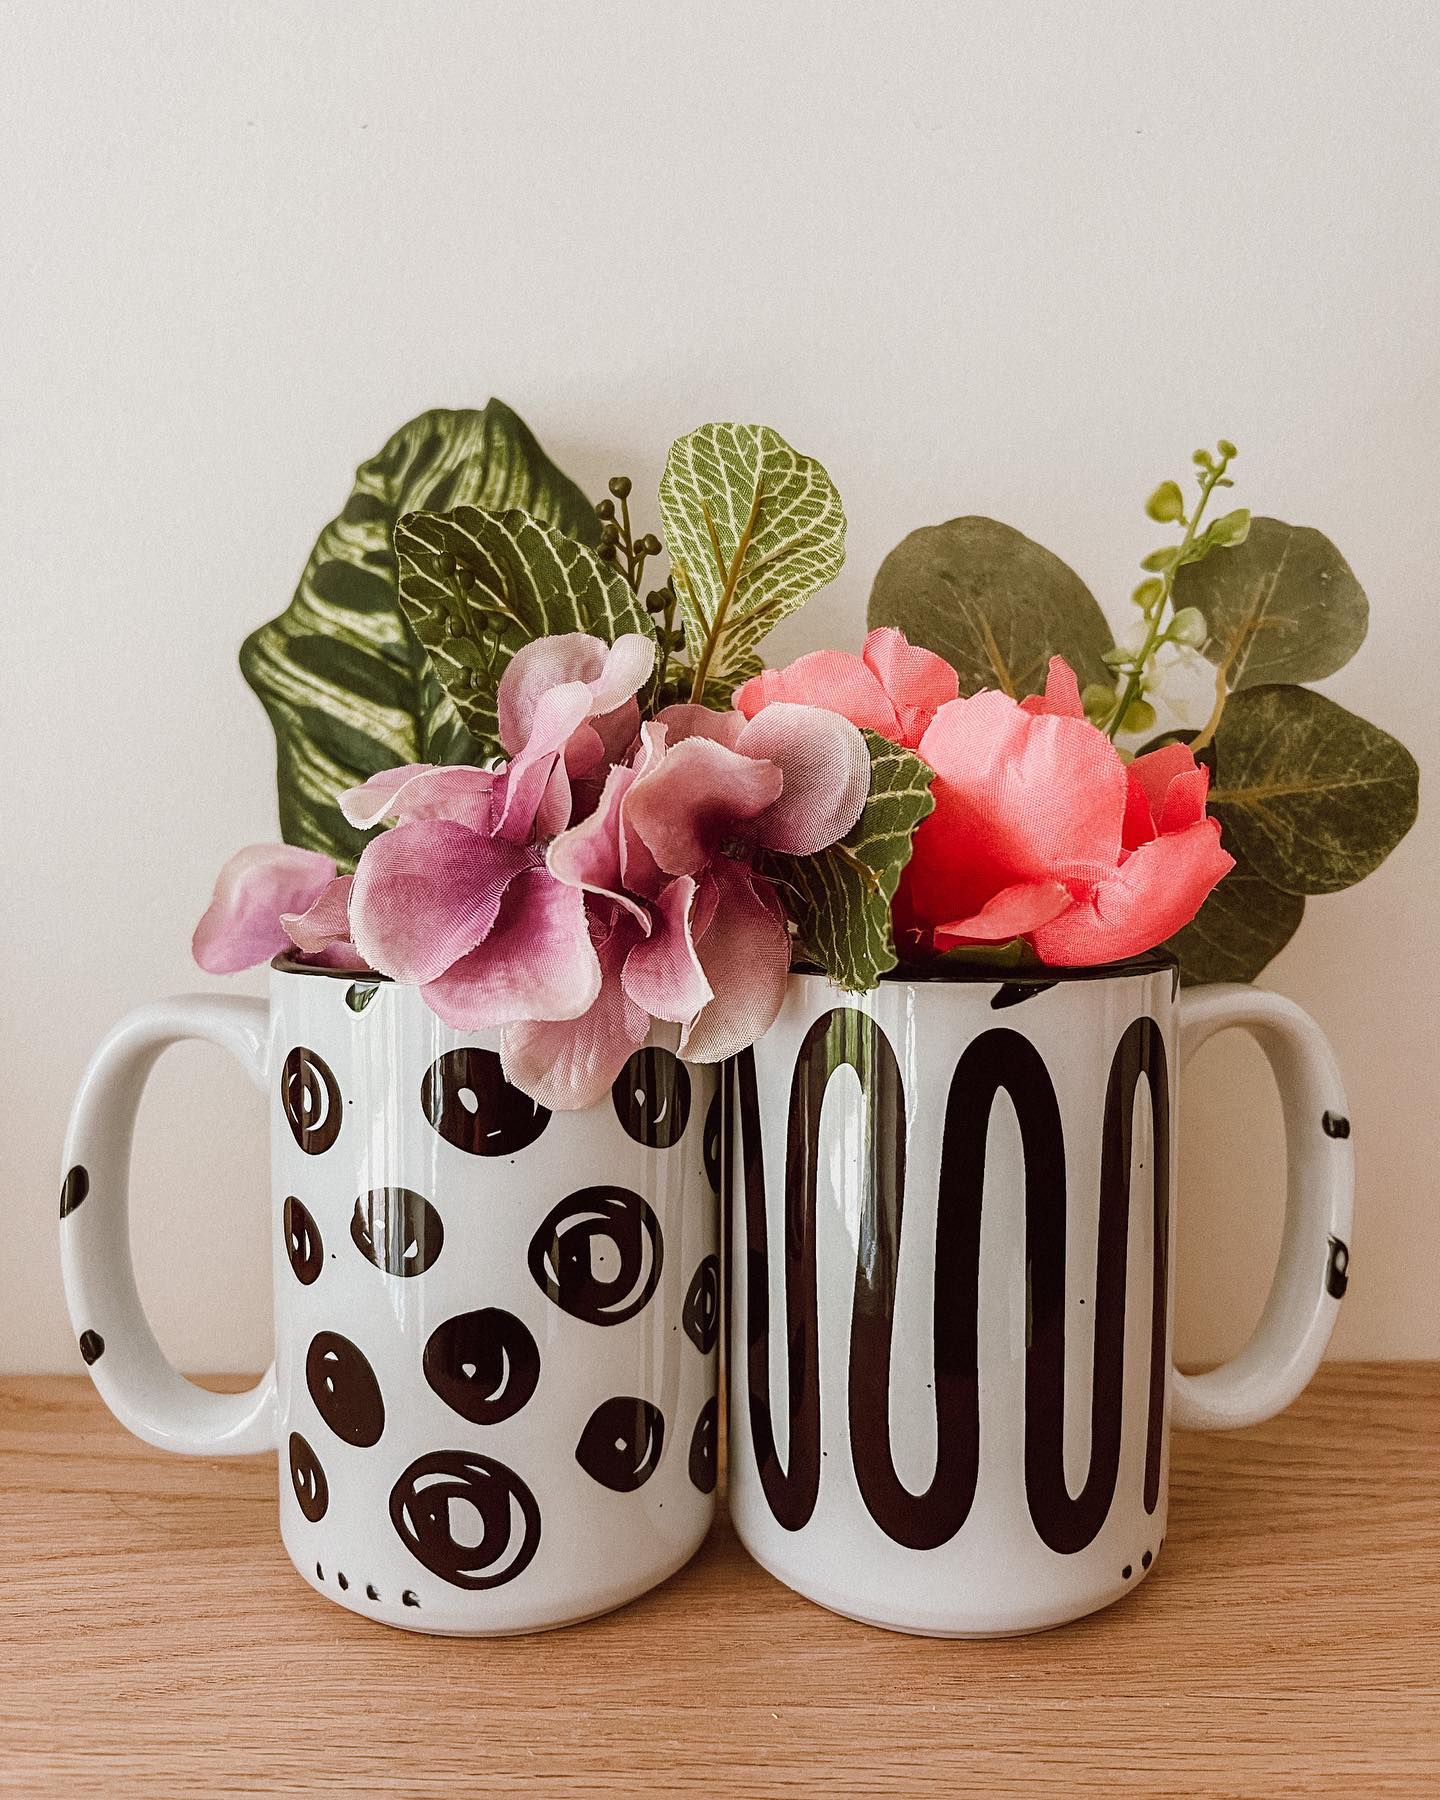 One spotted mug and one abstract line mug are side by side and filled with pink flowers.